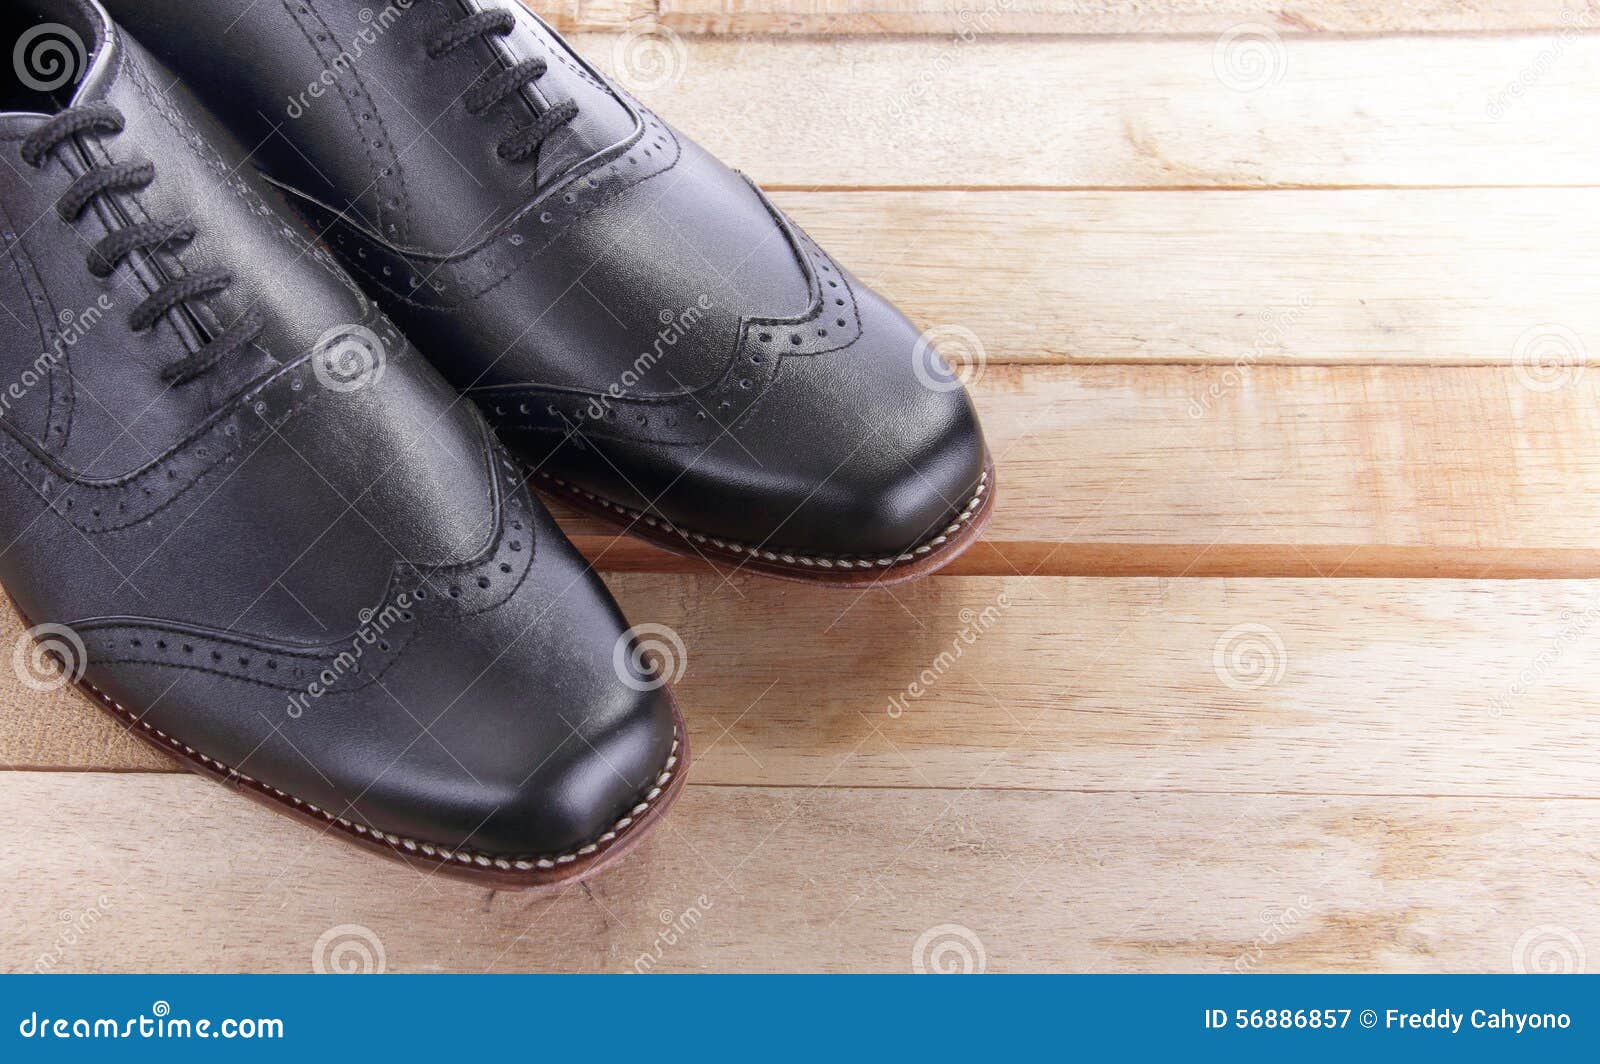 Leather shoes on wood stock image. Image of classy, color - 56886857